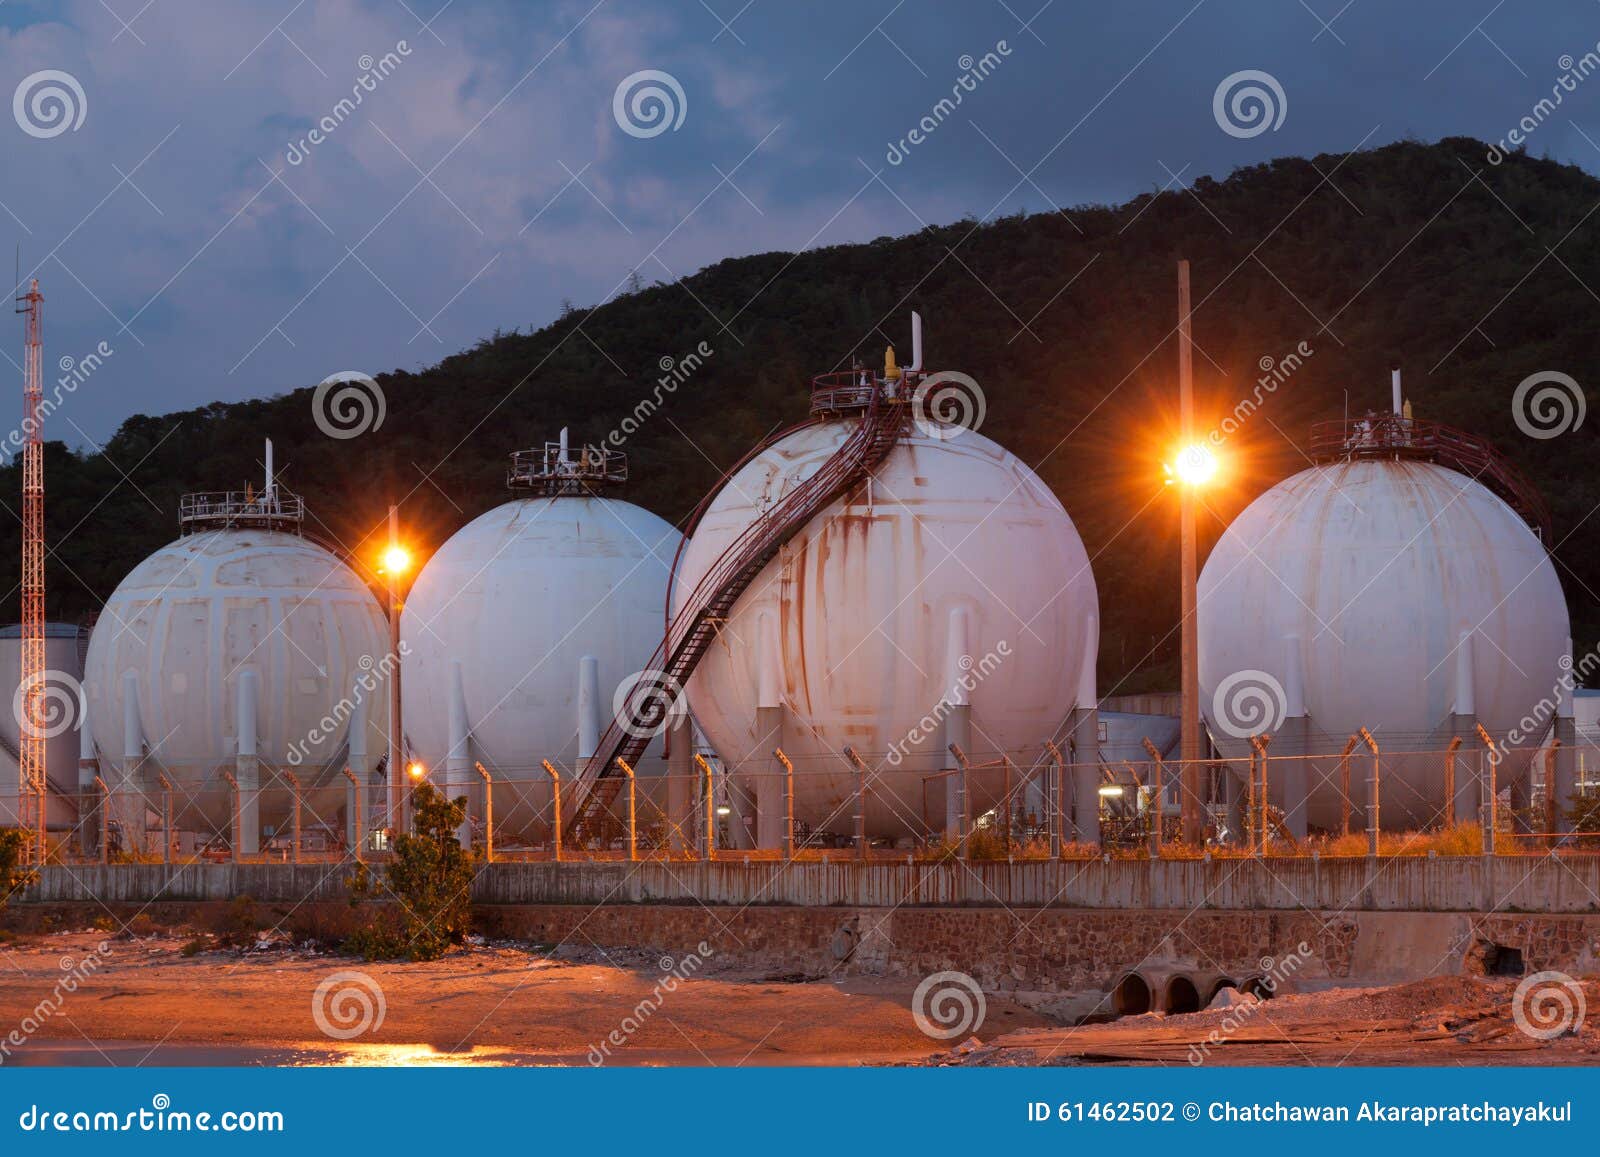 natural gas storage tank in sphere  at twilight time